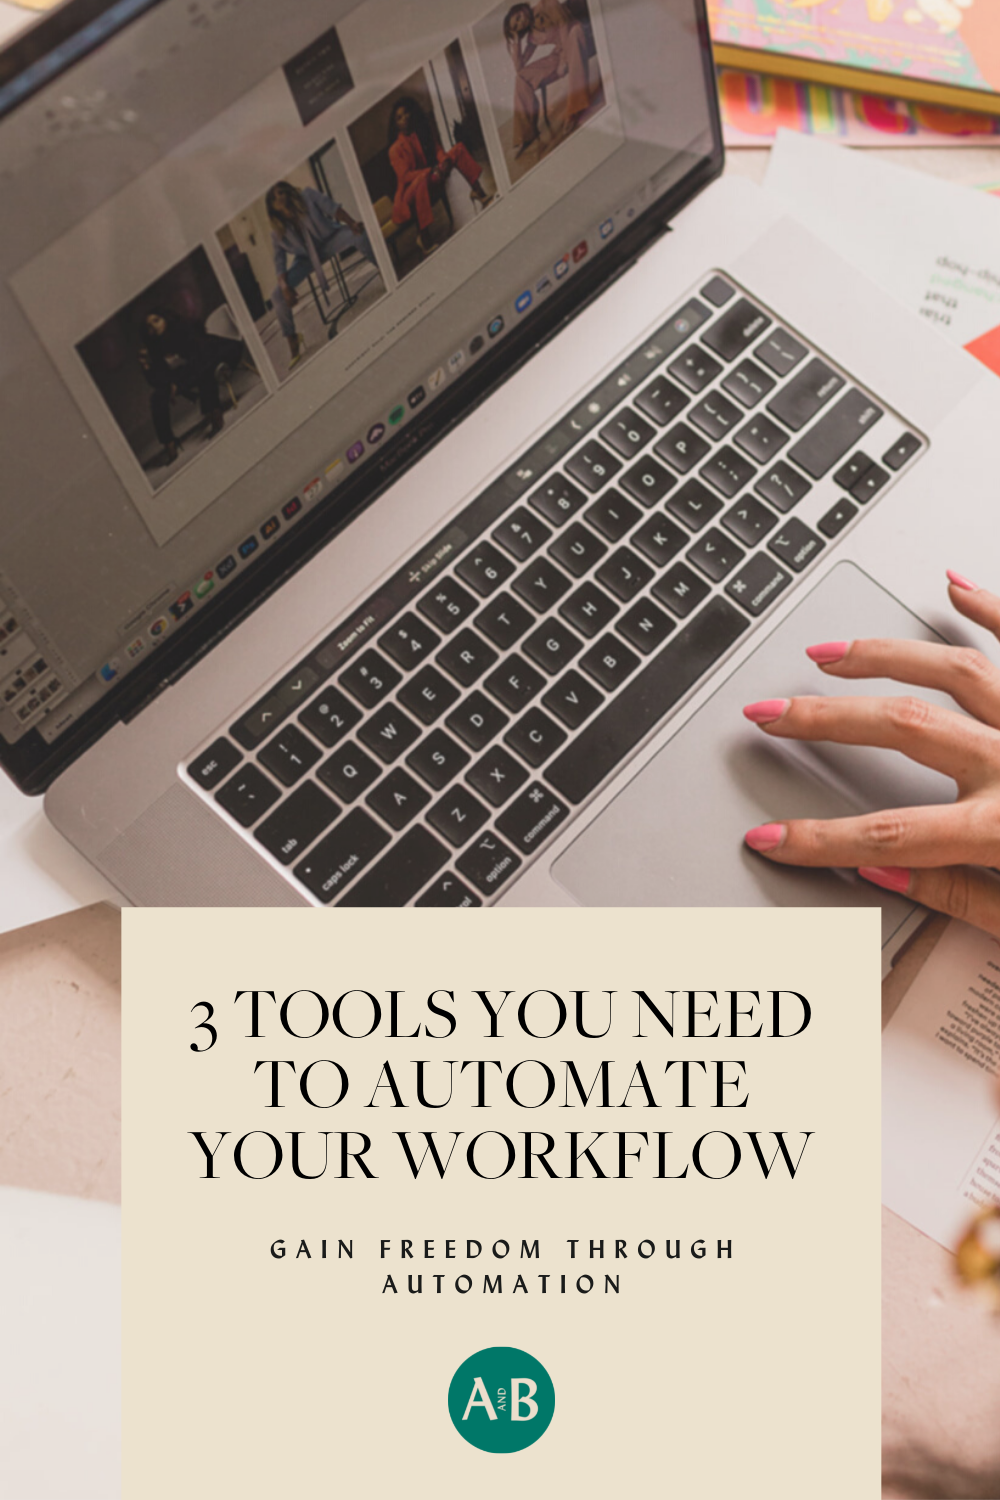 3 TOOLS YOU NEED TO AUTOMATE YOUR WORKFLOW